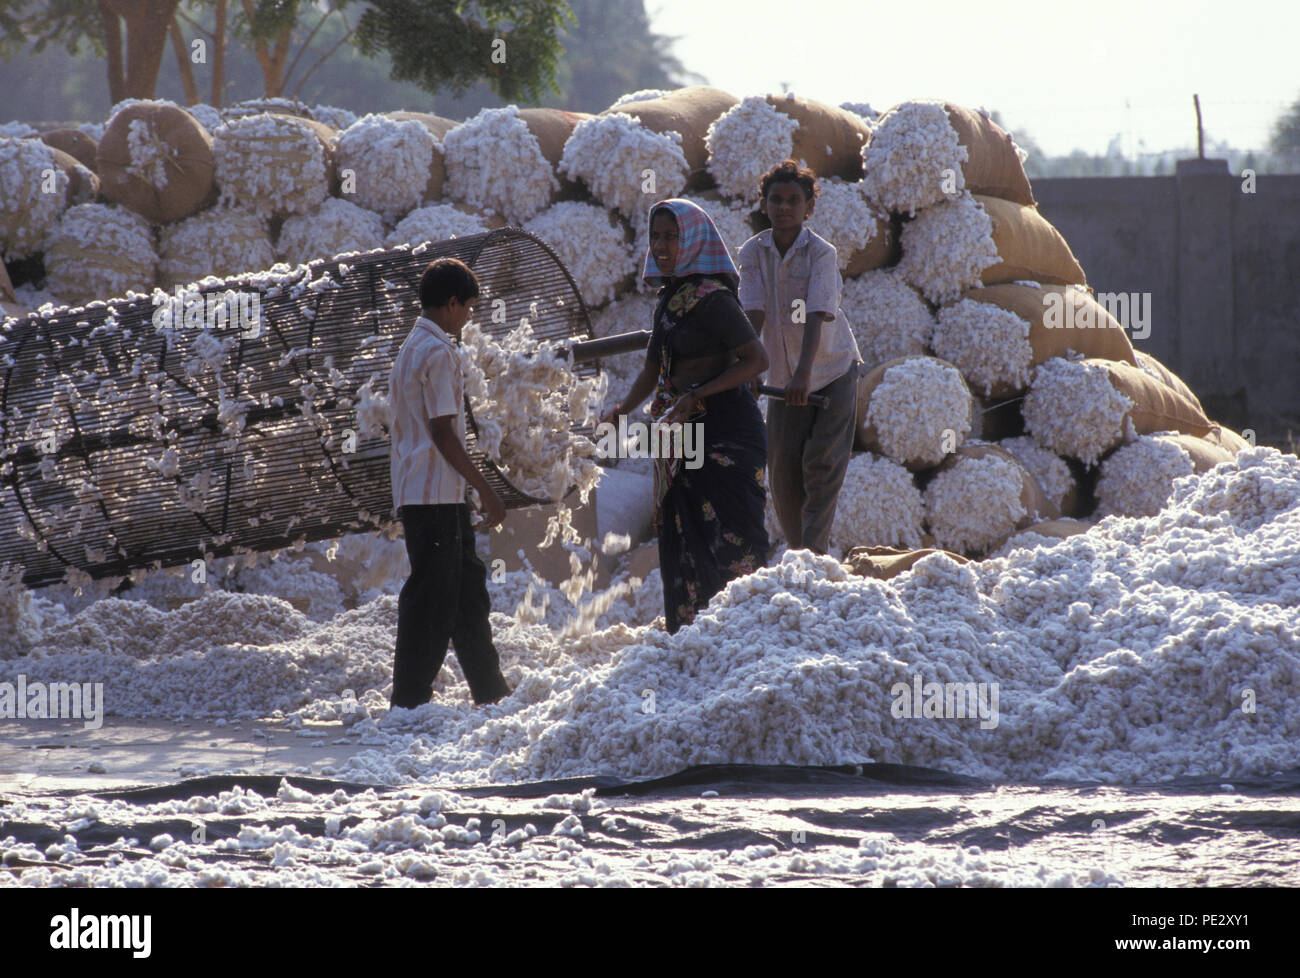 Cotton being milled in Warangal, India Stock Photo